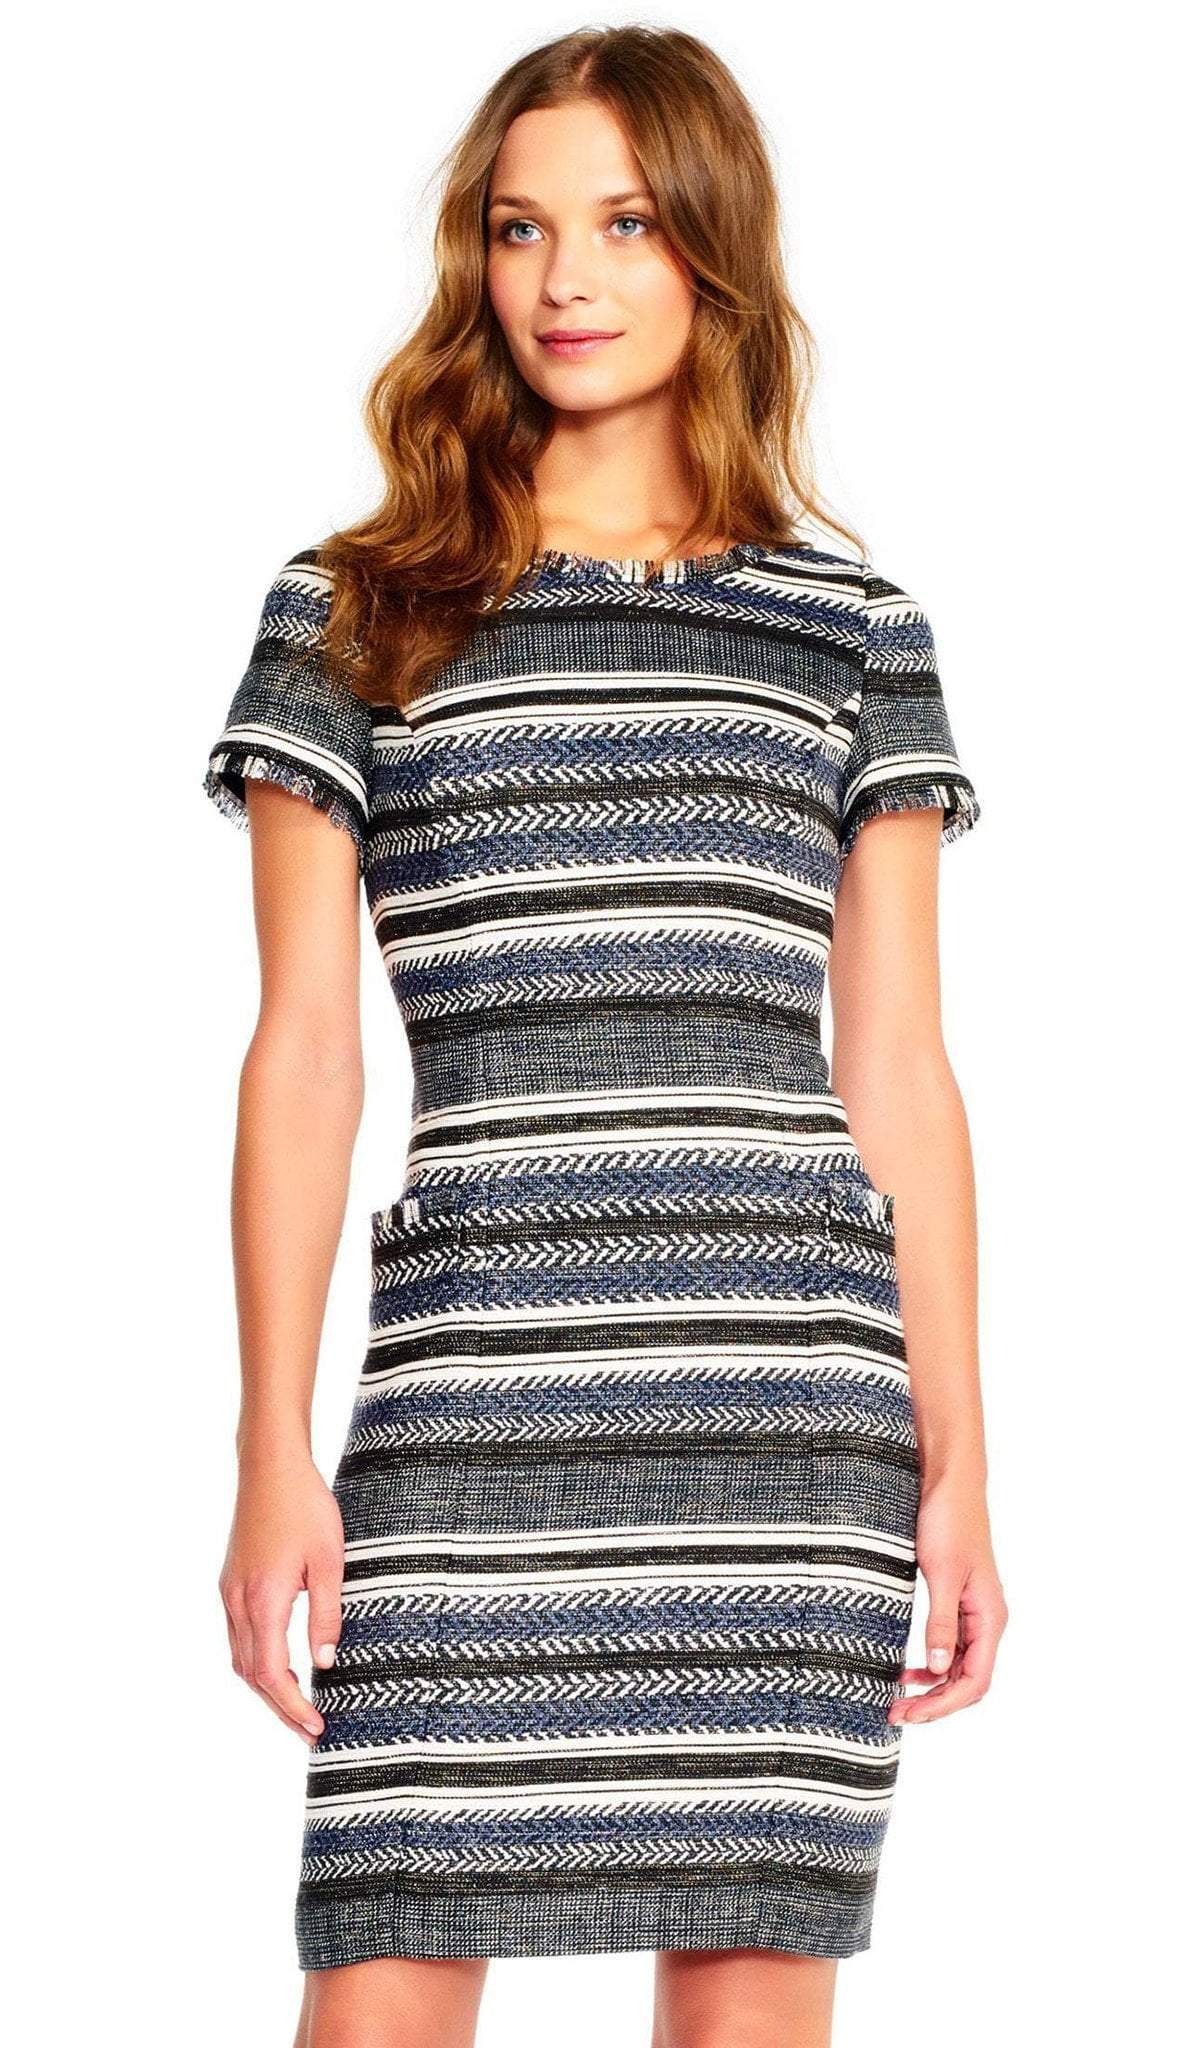 Adrianna Papell - AP1D101468 Stripe Patterned Sheath Dress With Cutout In Blue and Black